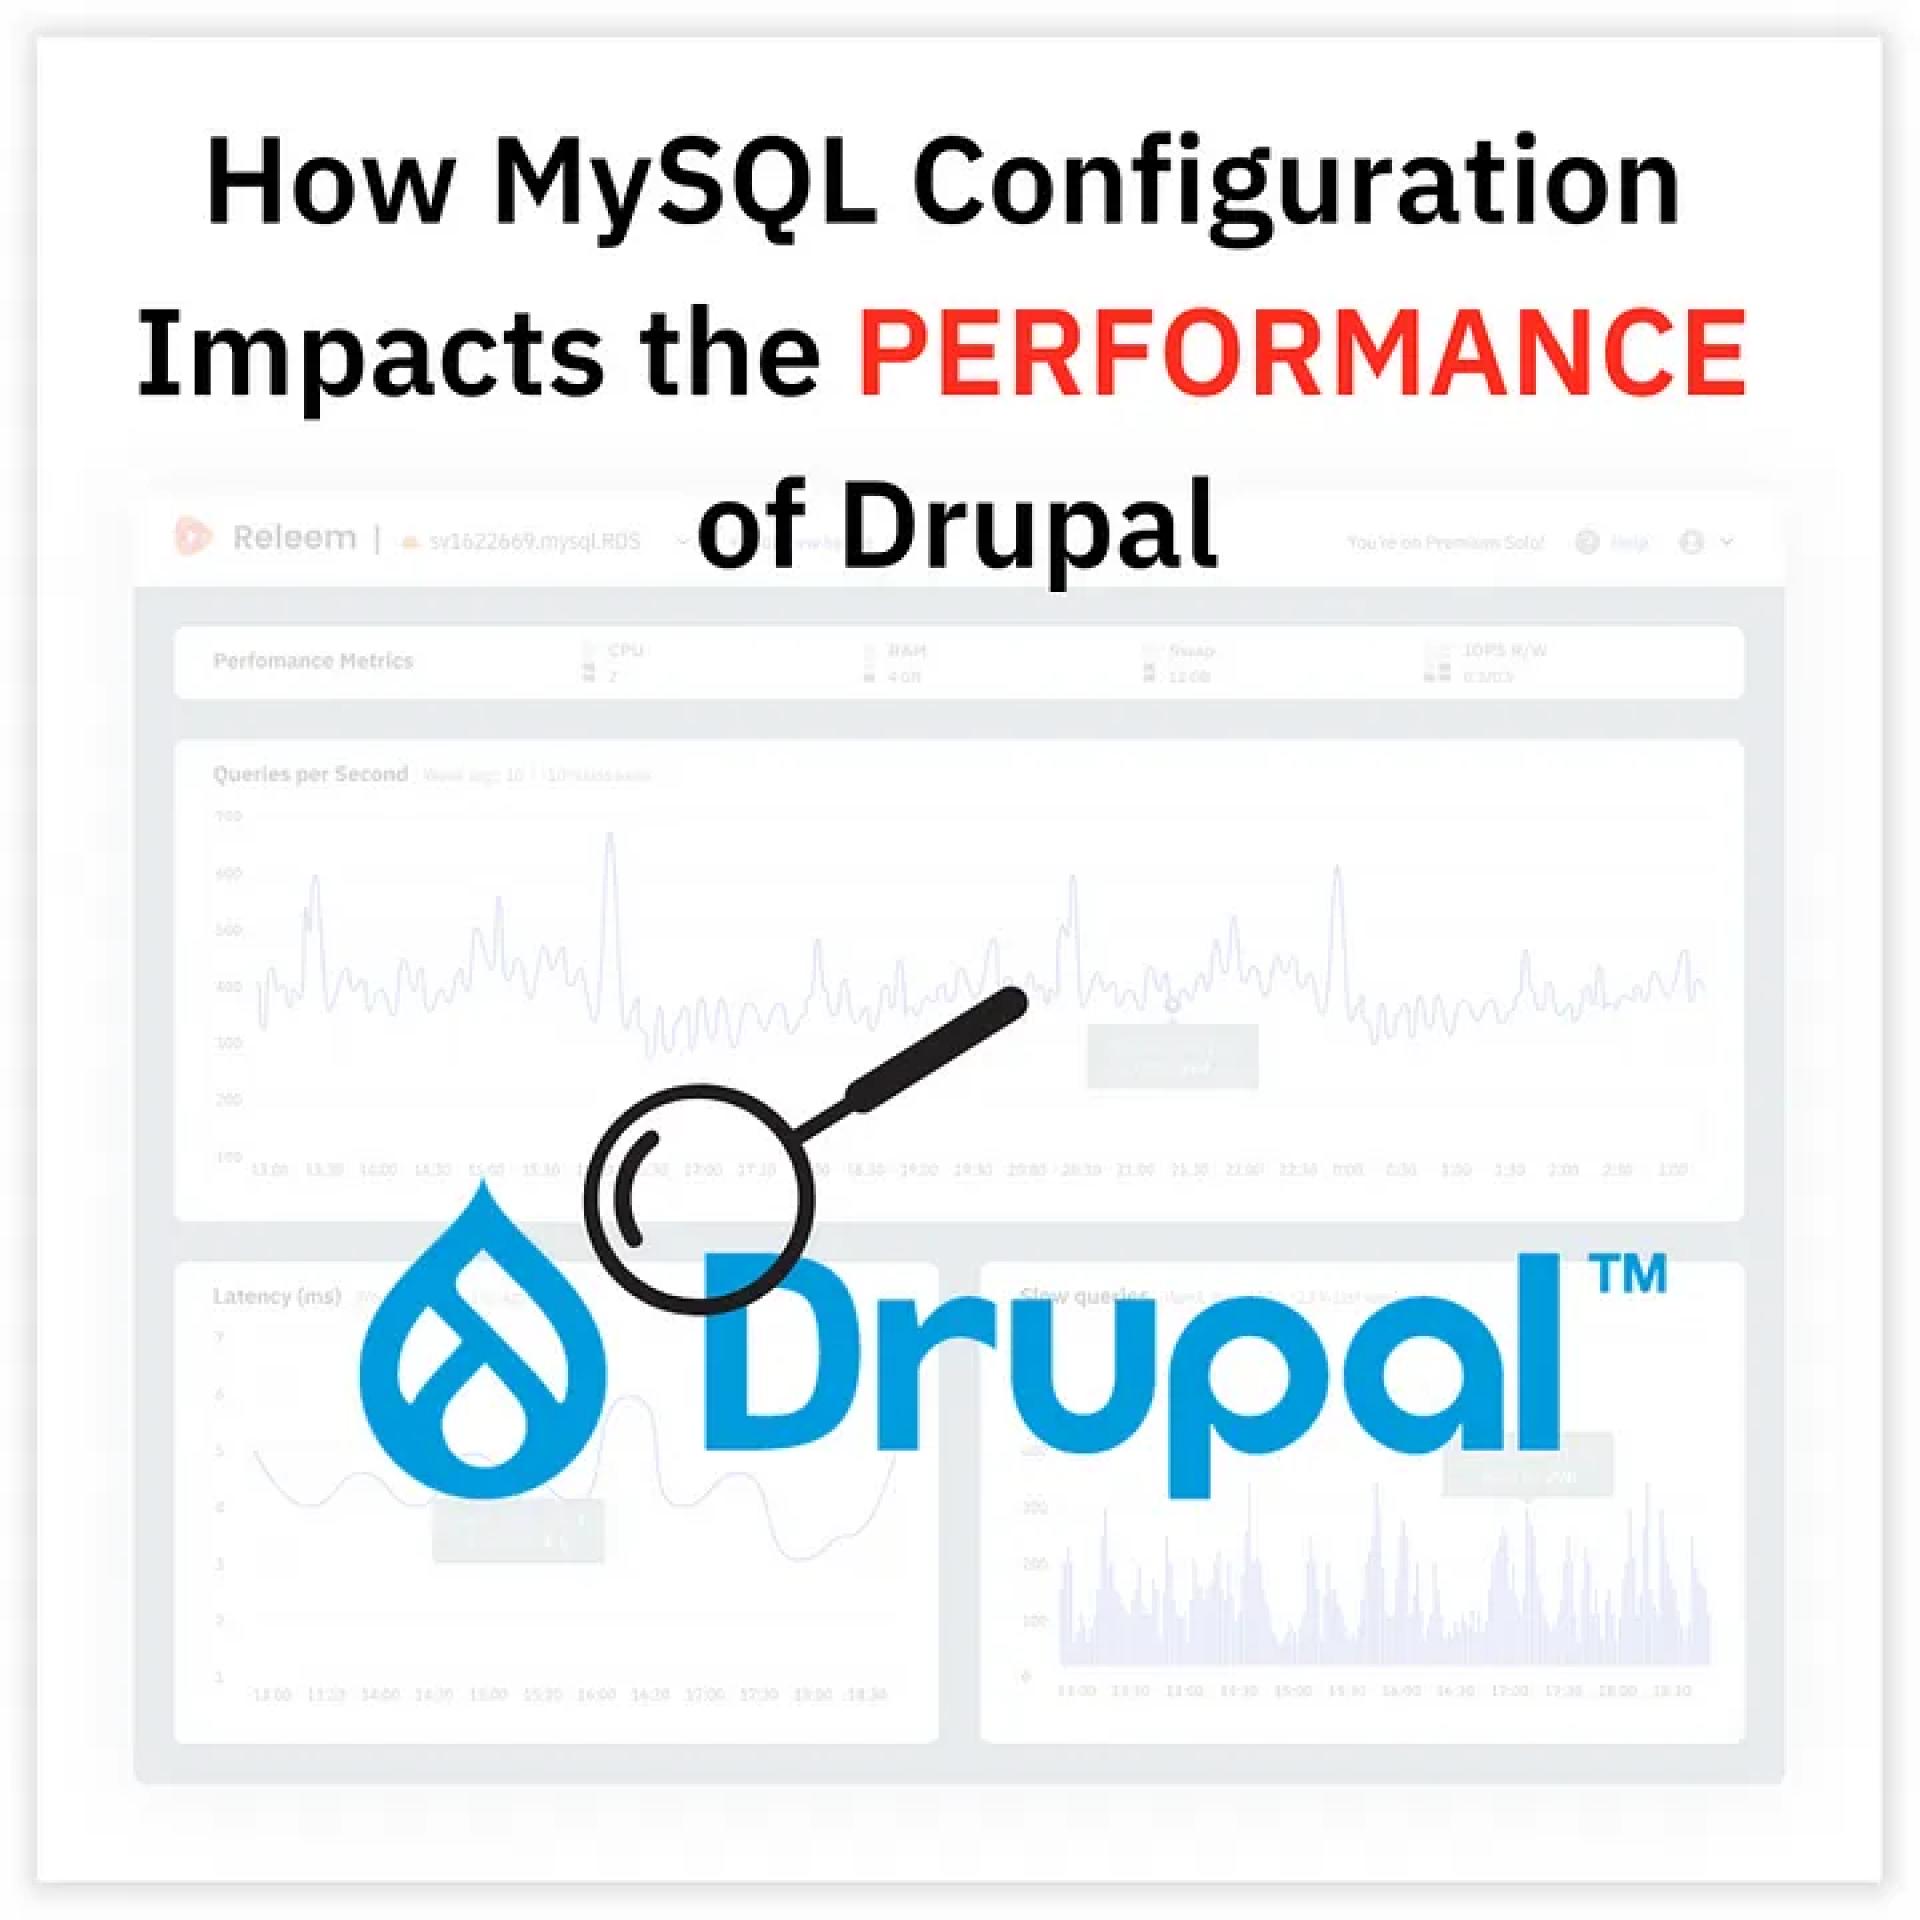 How MySQL Tuning Dramatically Improves the Drupal Performance